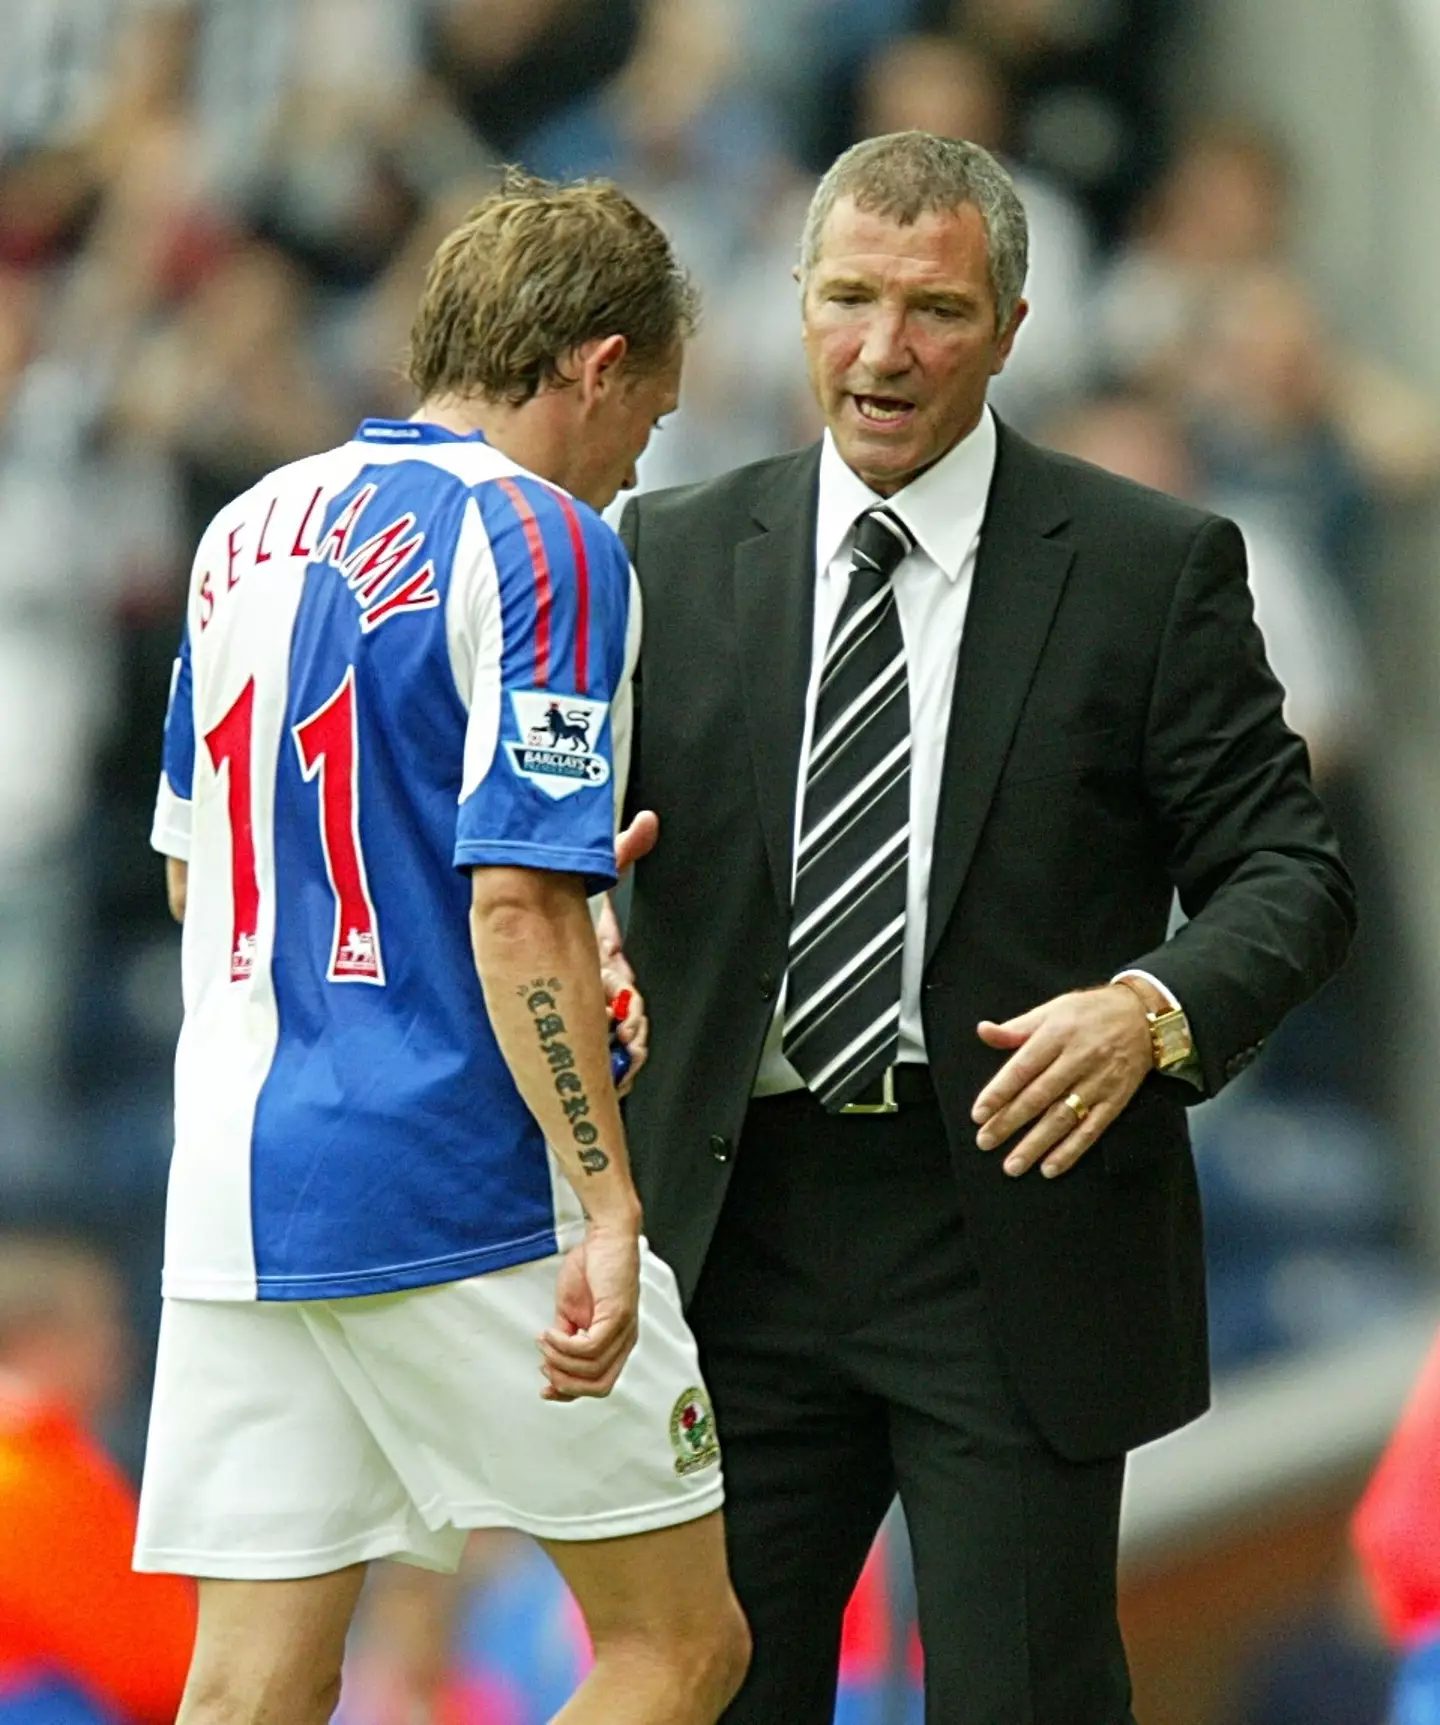 Bellamy was sold to Blackburn after falling out with Souness (Image credit: PA)